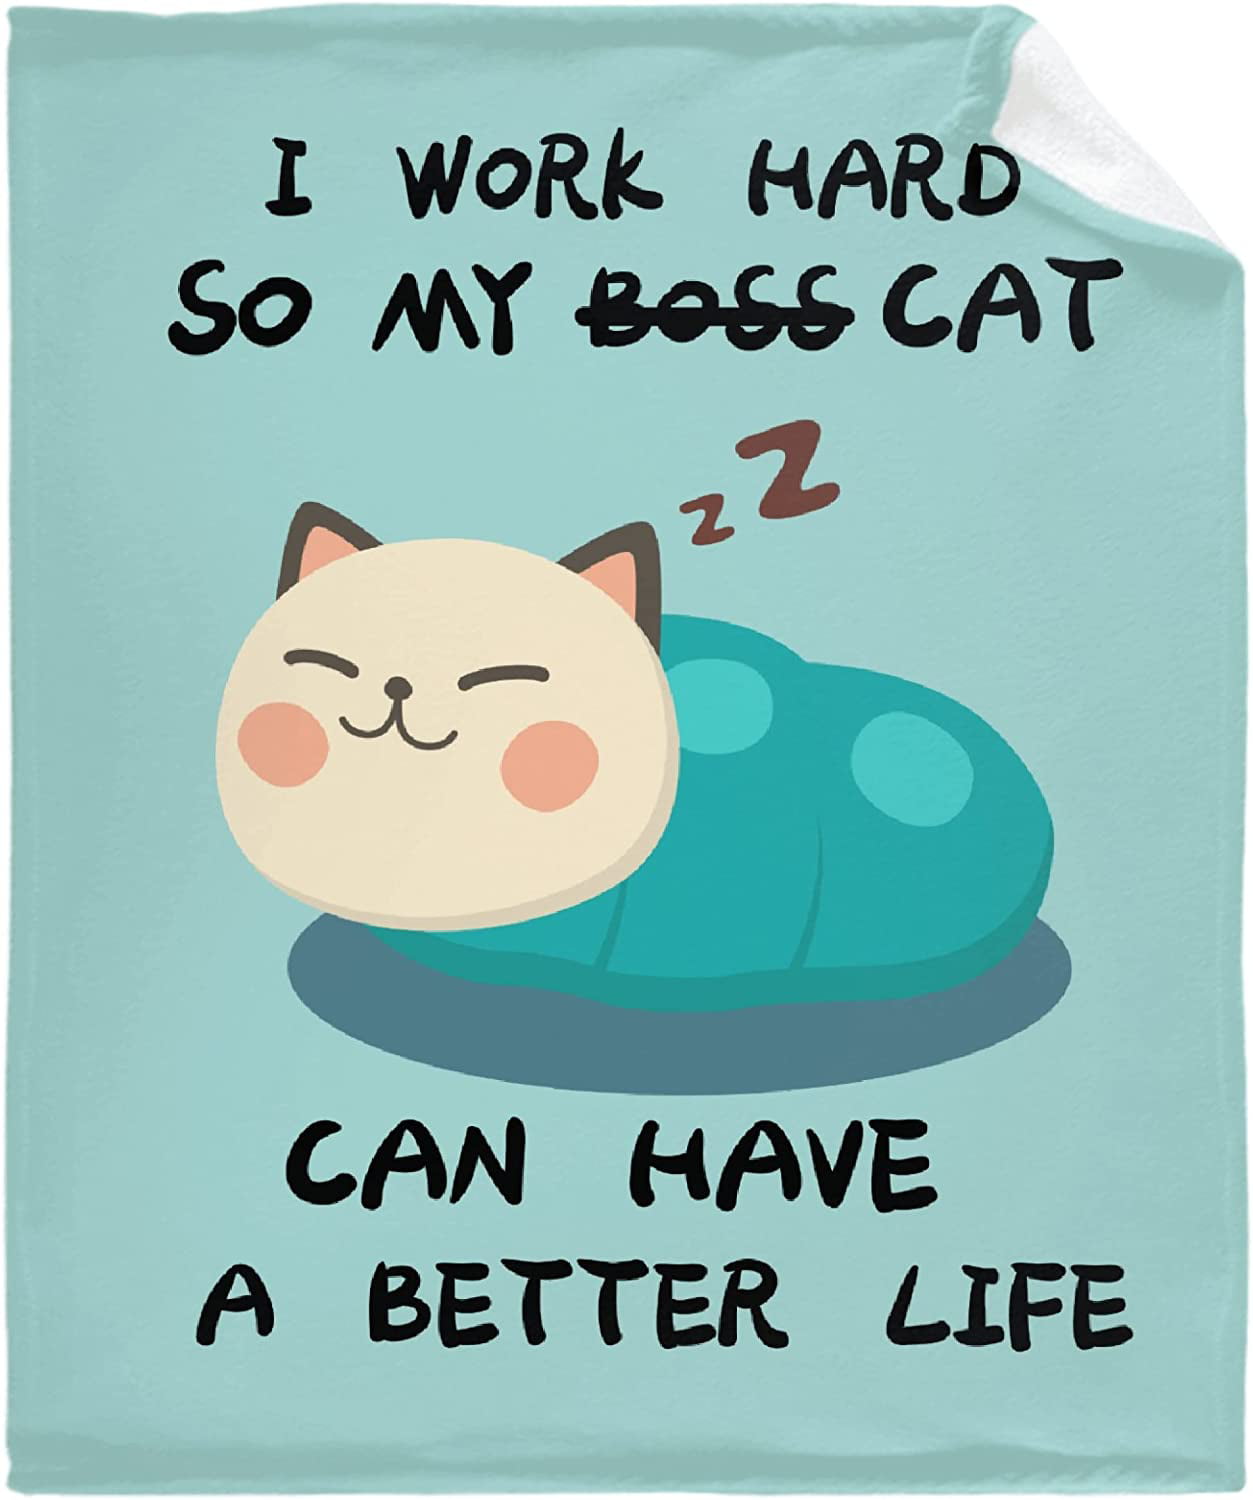 I Work Hard So My Cat Can Have A Better Life Throw Blanket Super Soft  Lightweight Luxurious Cozy Warm Fluffy Plush For Bed Couch Living Room  50